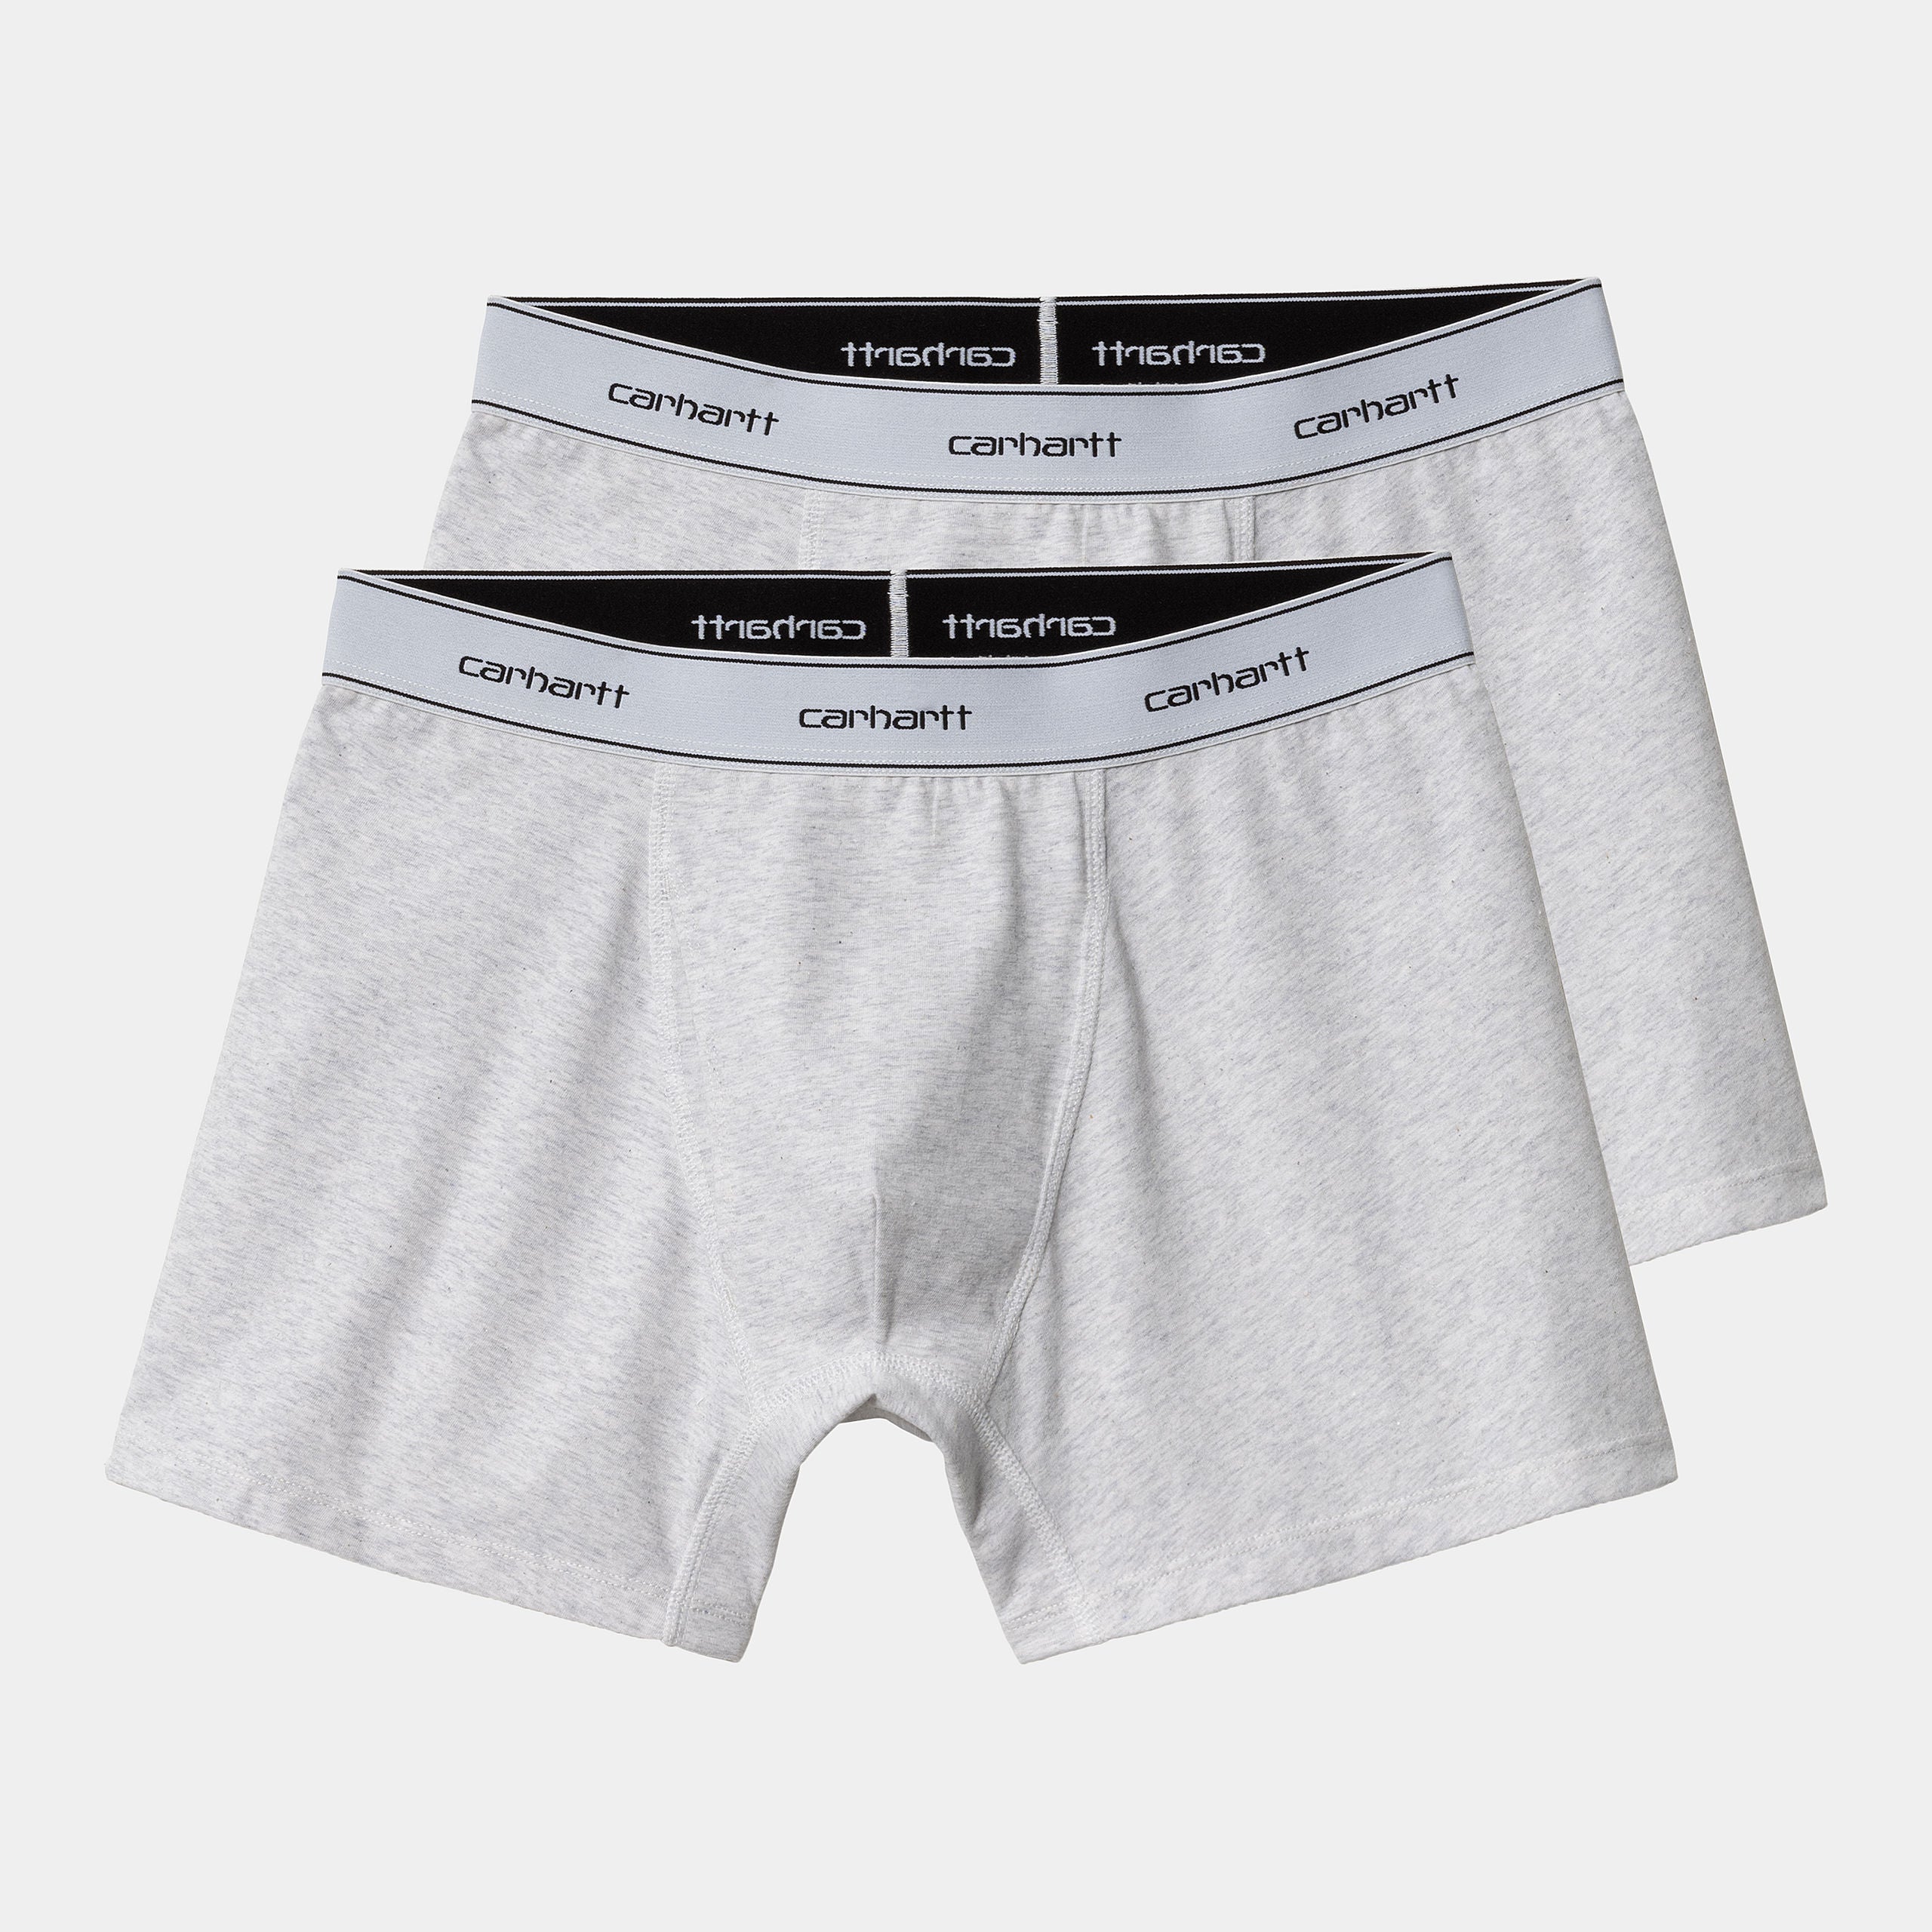 Carhartt Mens Cotton Trunks (2 Pack) - Ash Heather - The Foot Factory